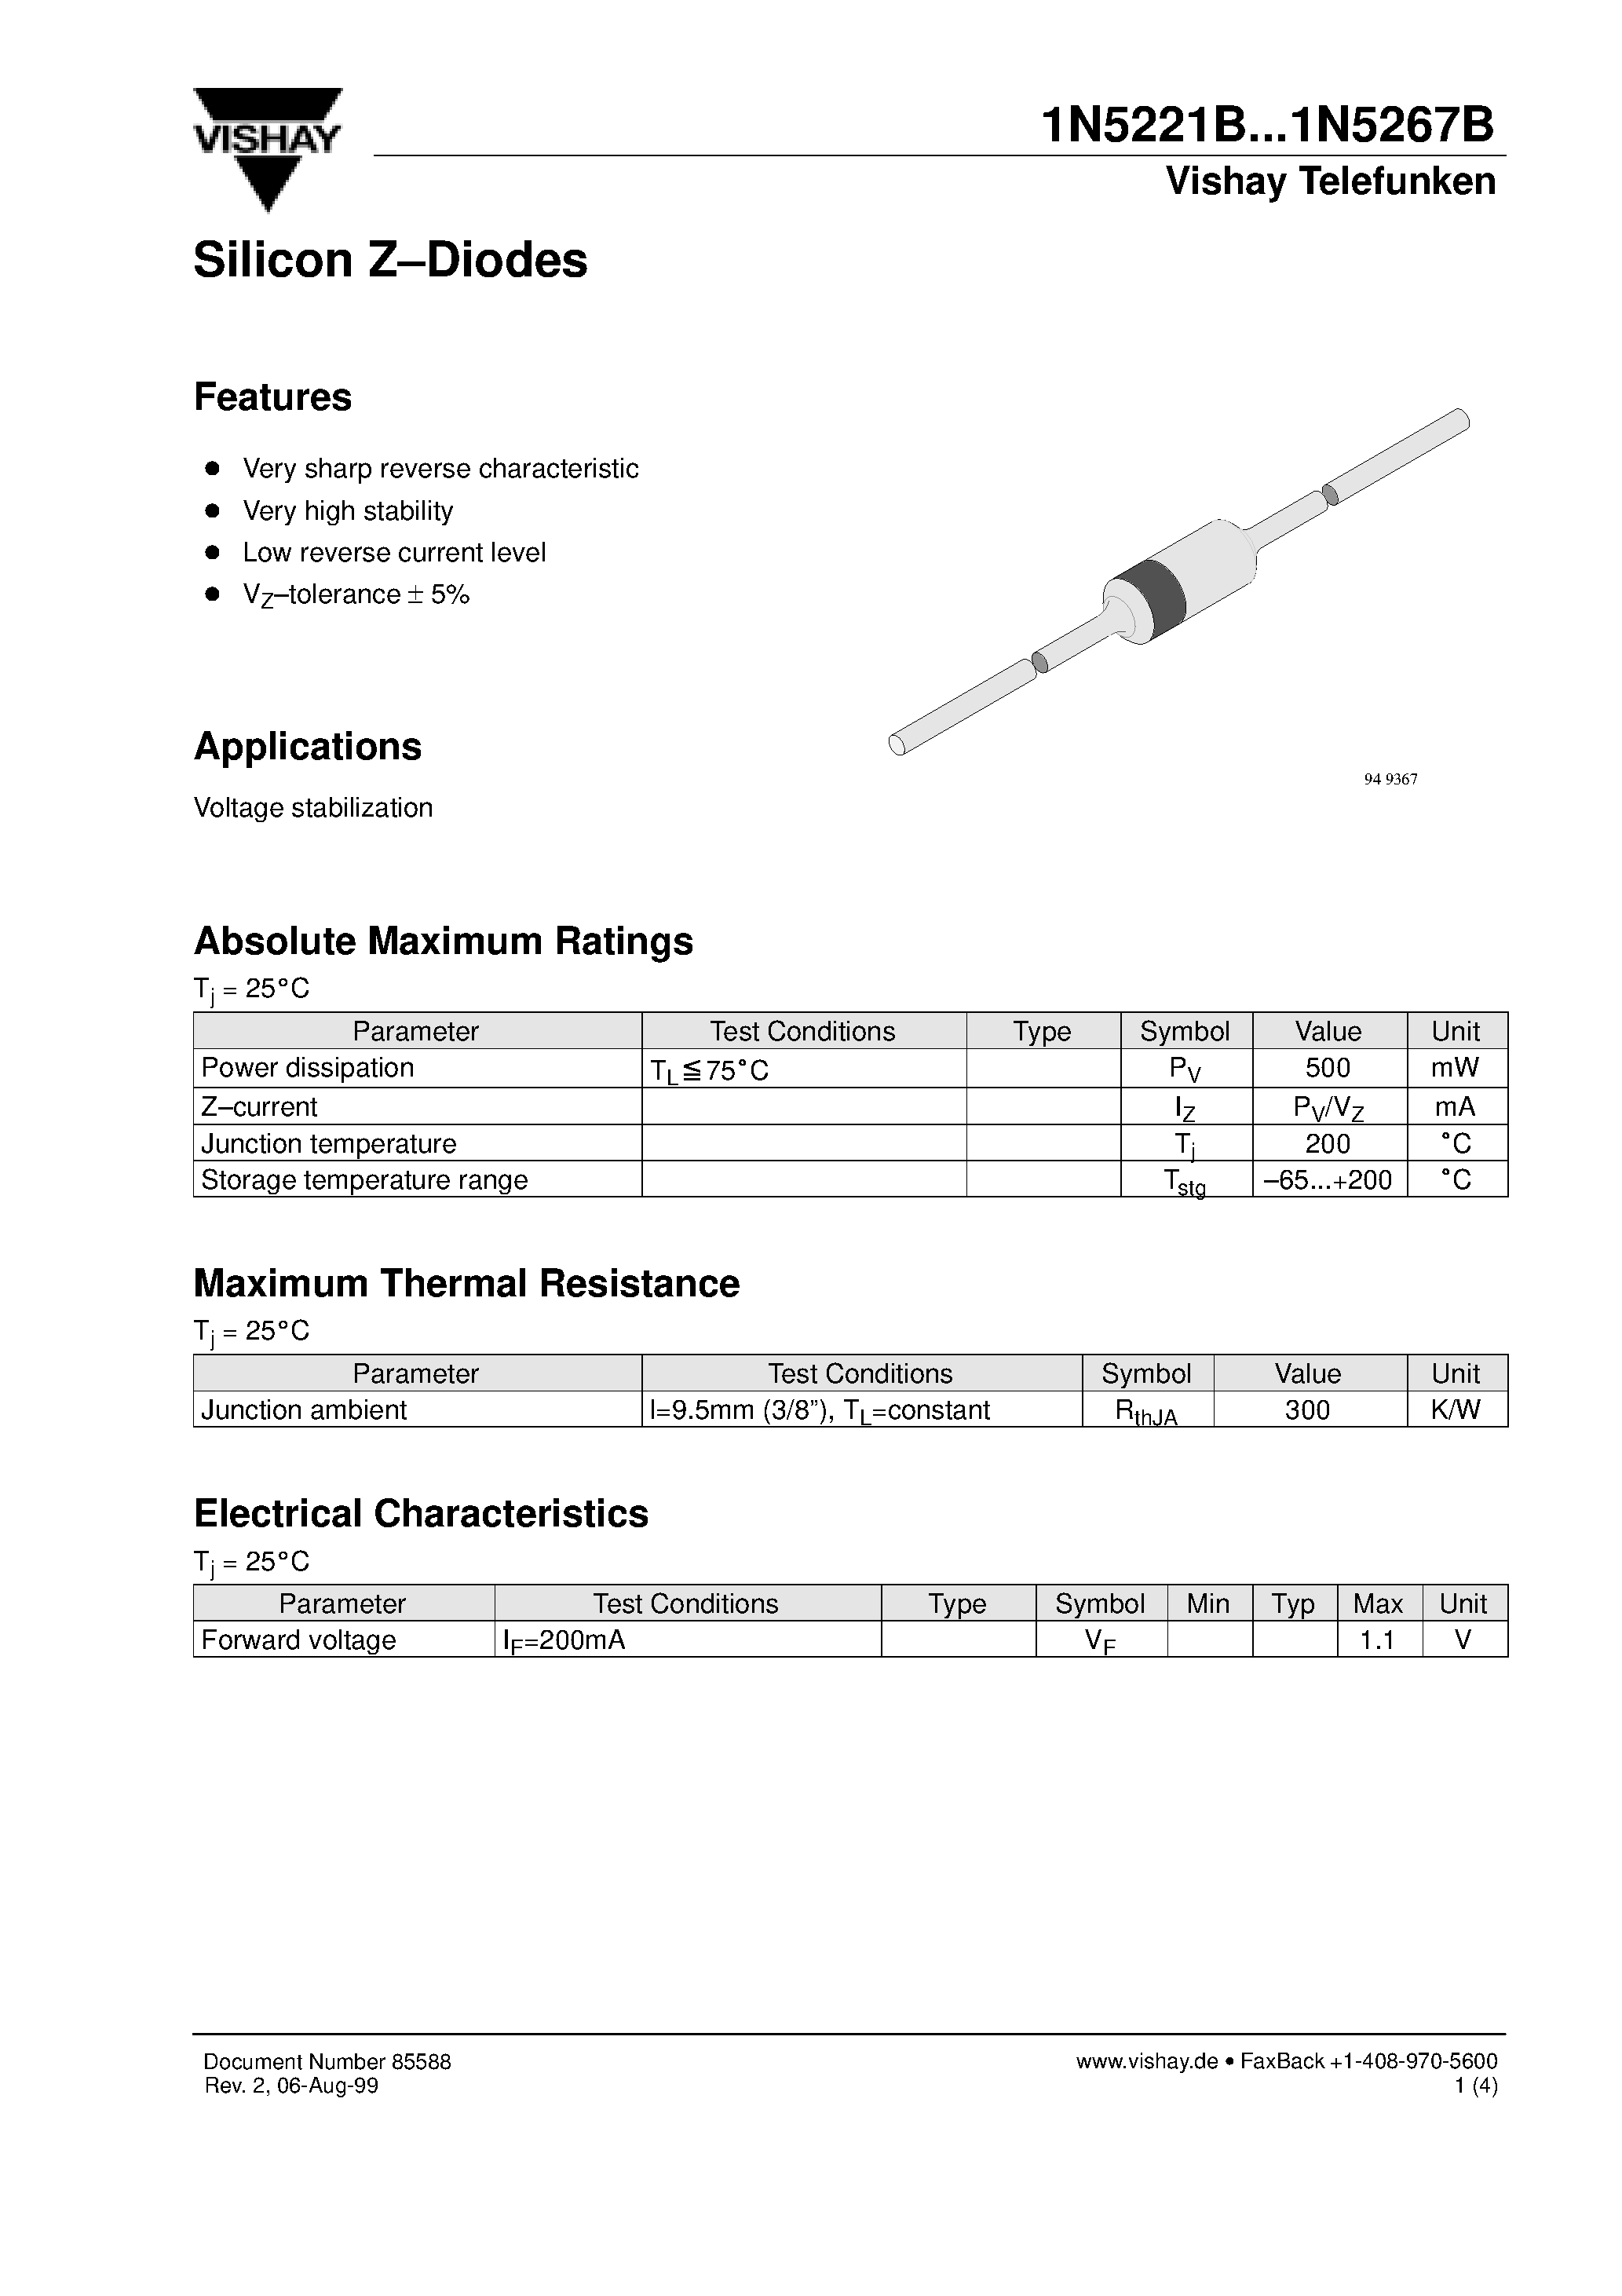 Datasheet 1N5235B - Silicon Z-Diodes page 1